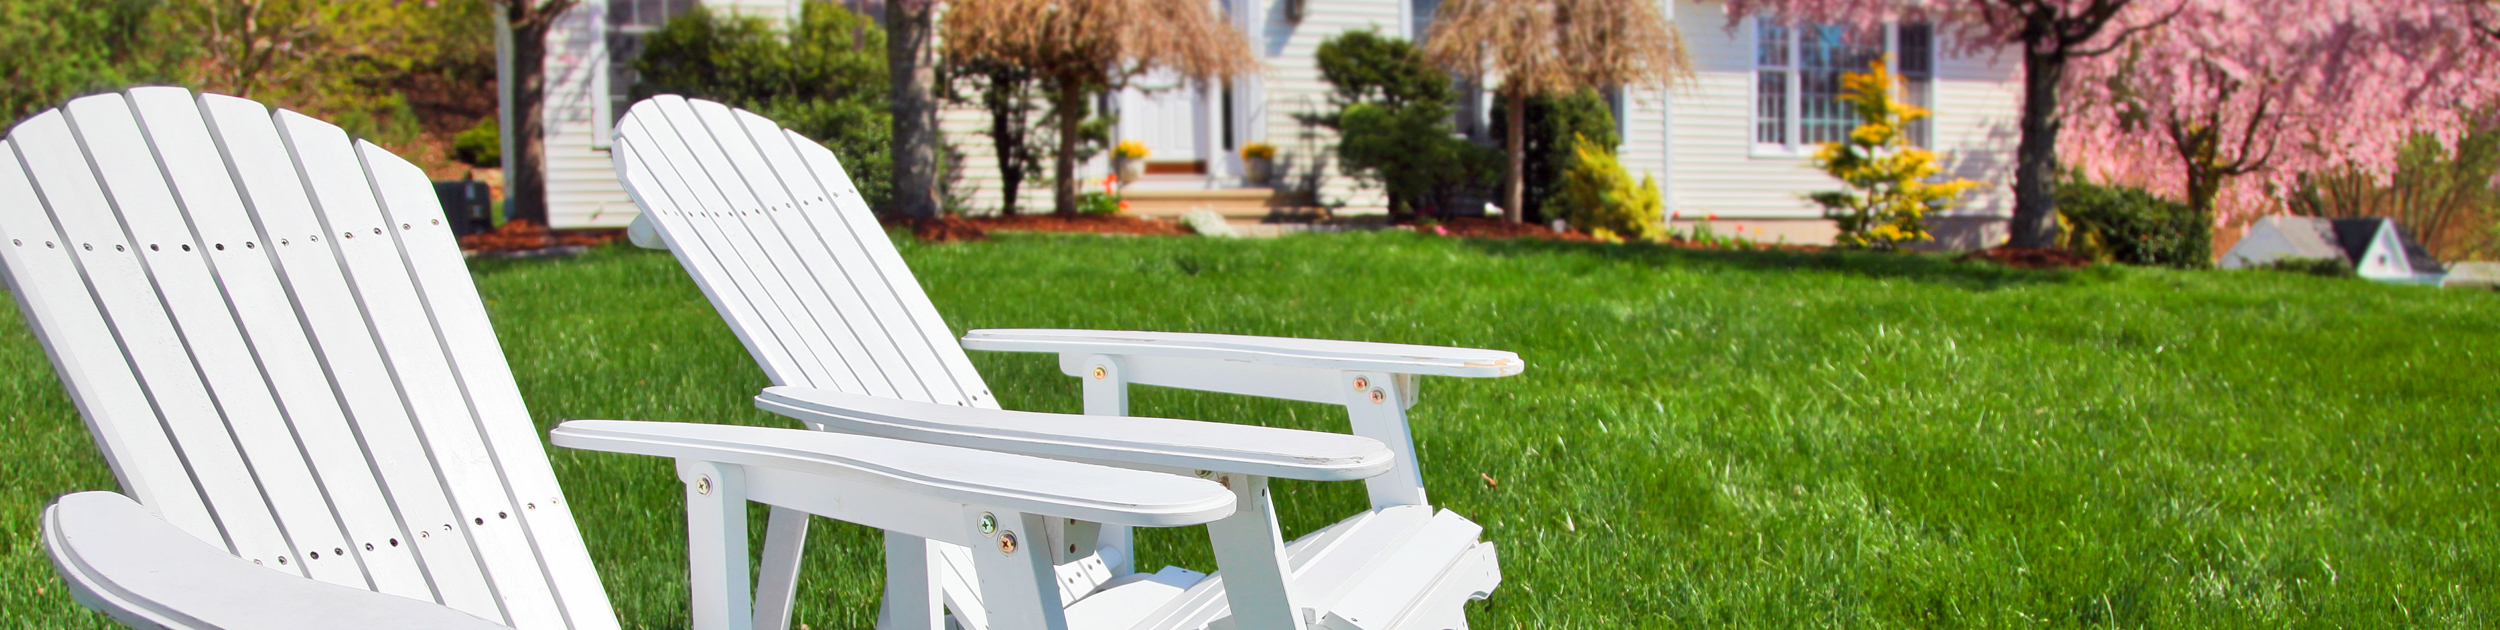 two white adarondack chairs sitting on a plush lawn with a white home and spring trees in the background